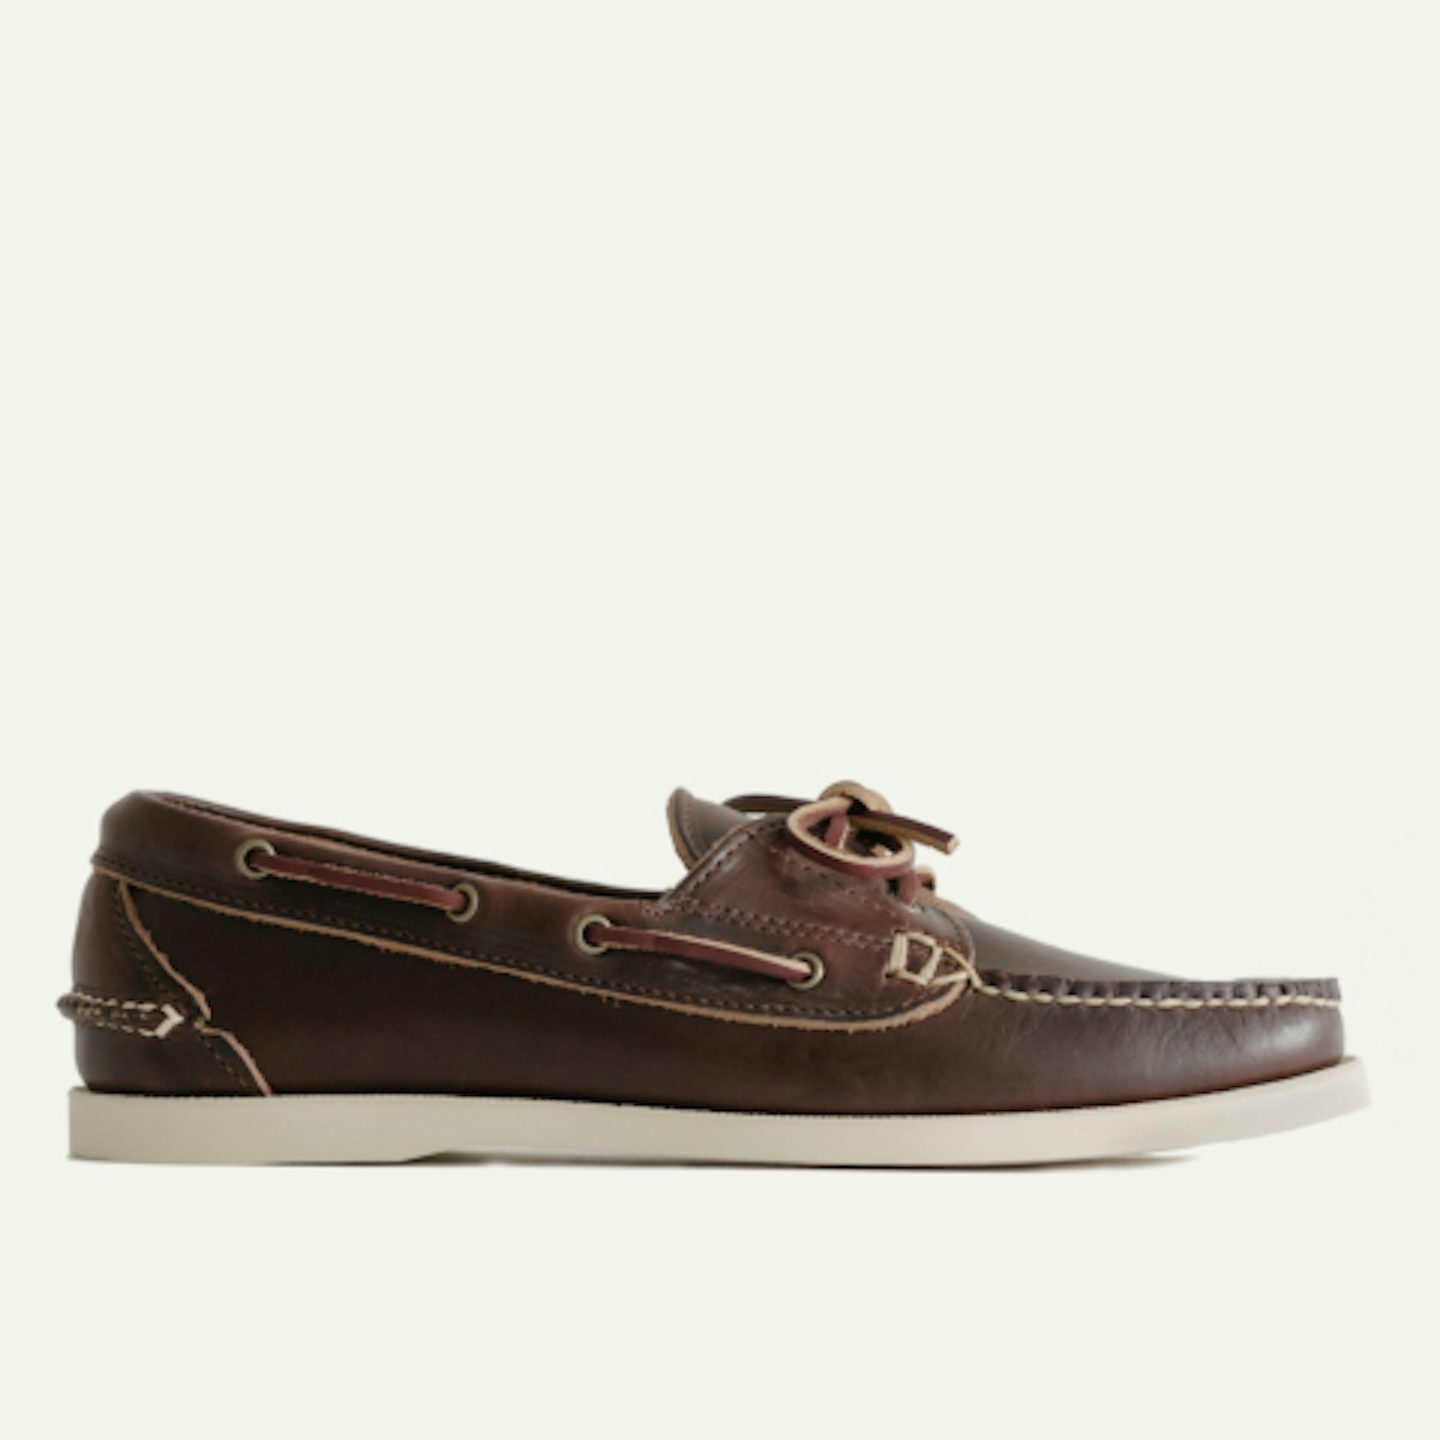 ASOS DESIGN boat shoes in tan leather with gum sole | ASOS